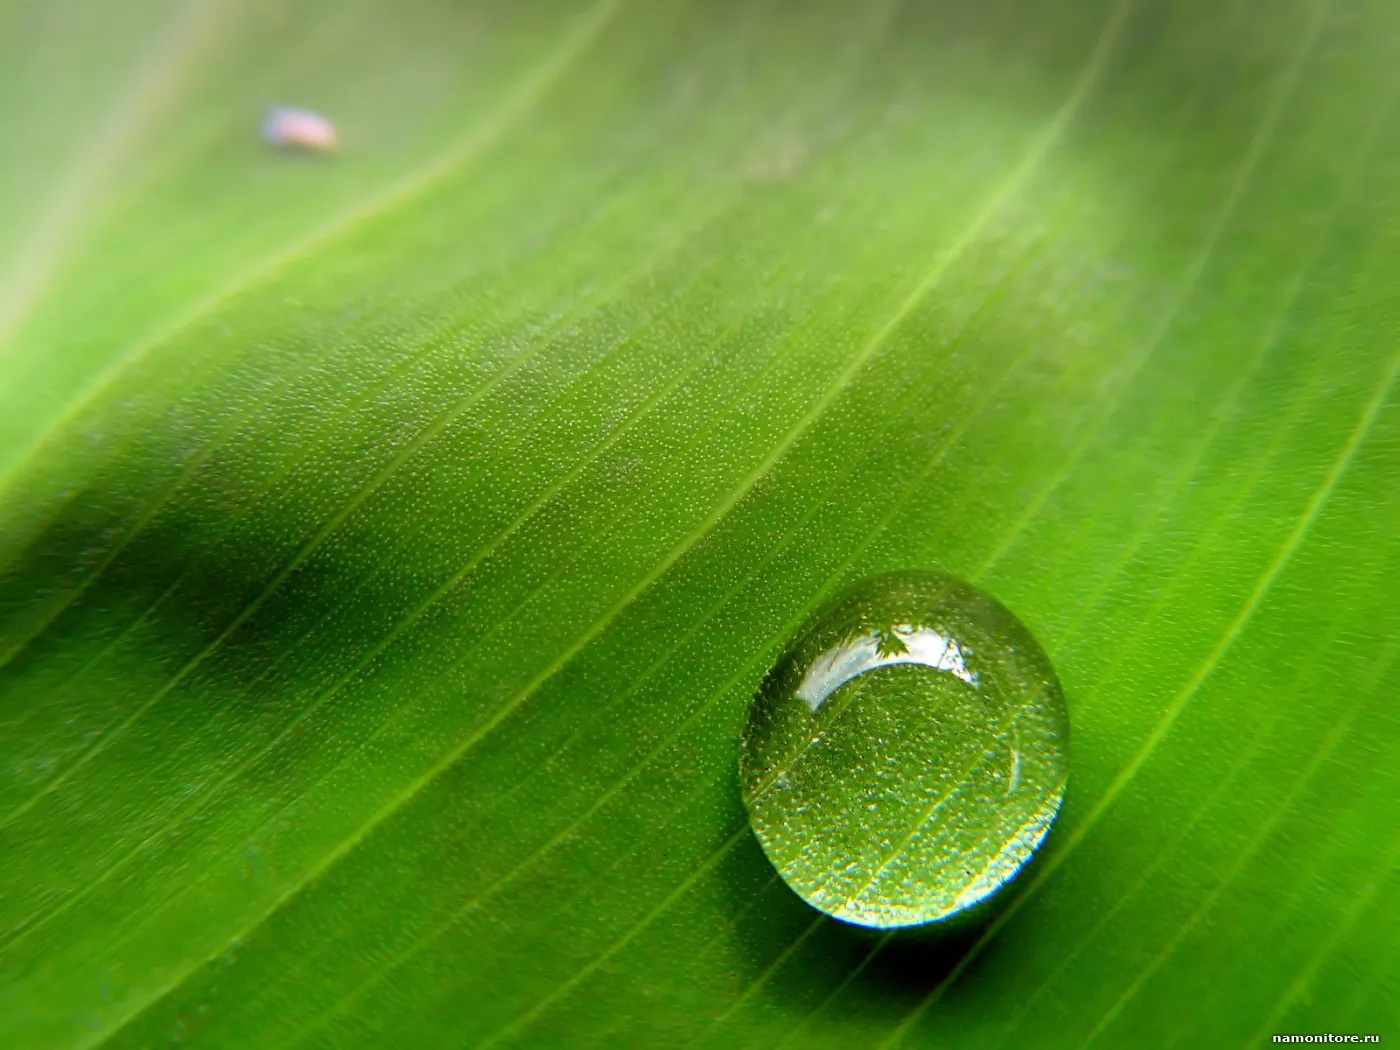 Droplet, best, green, nature x